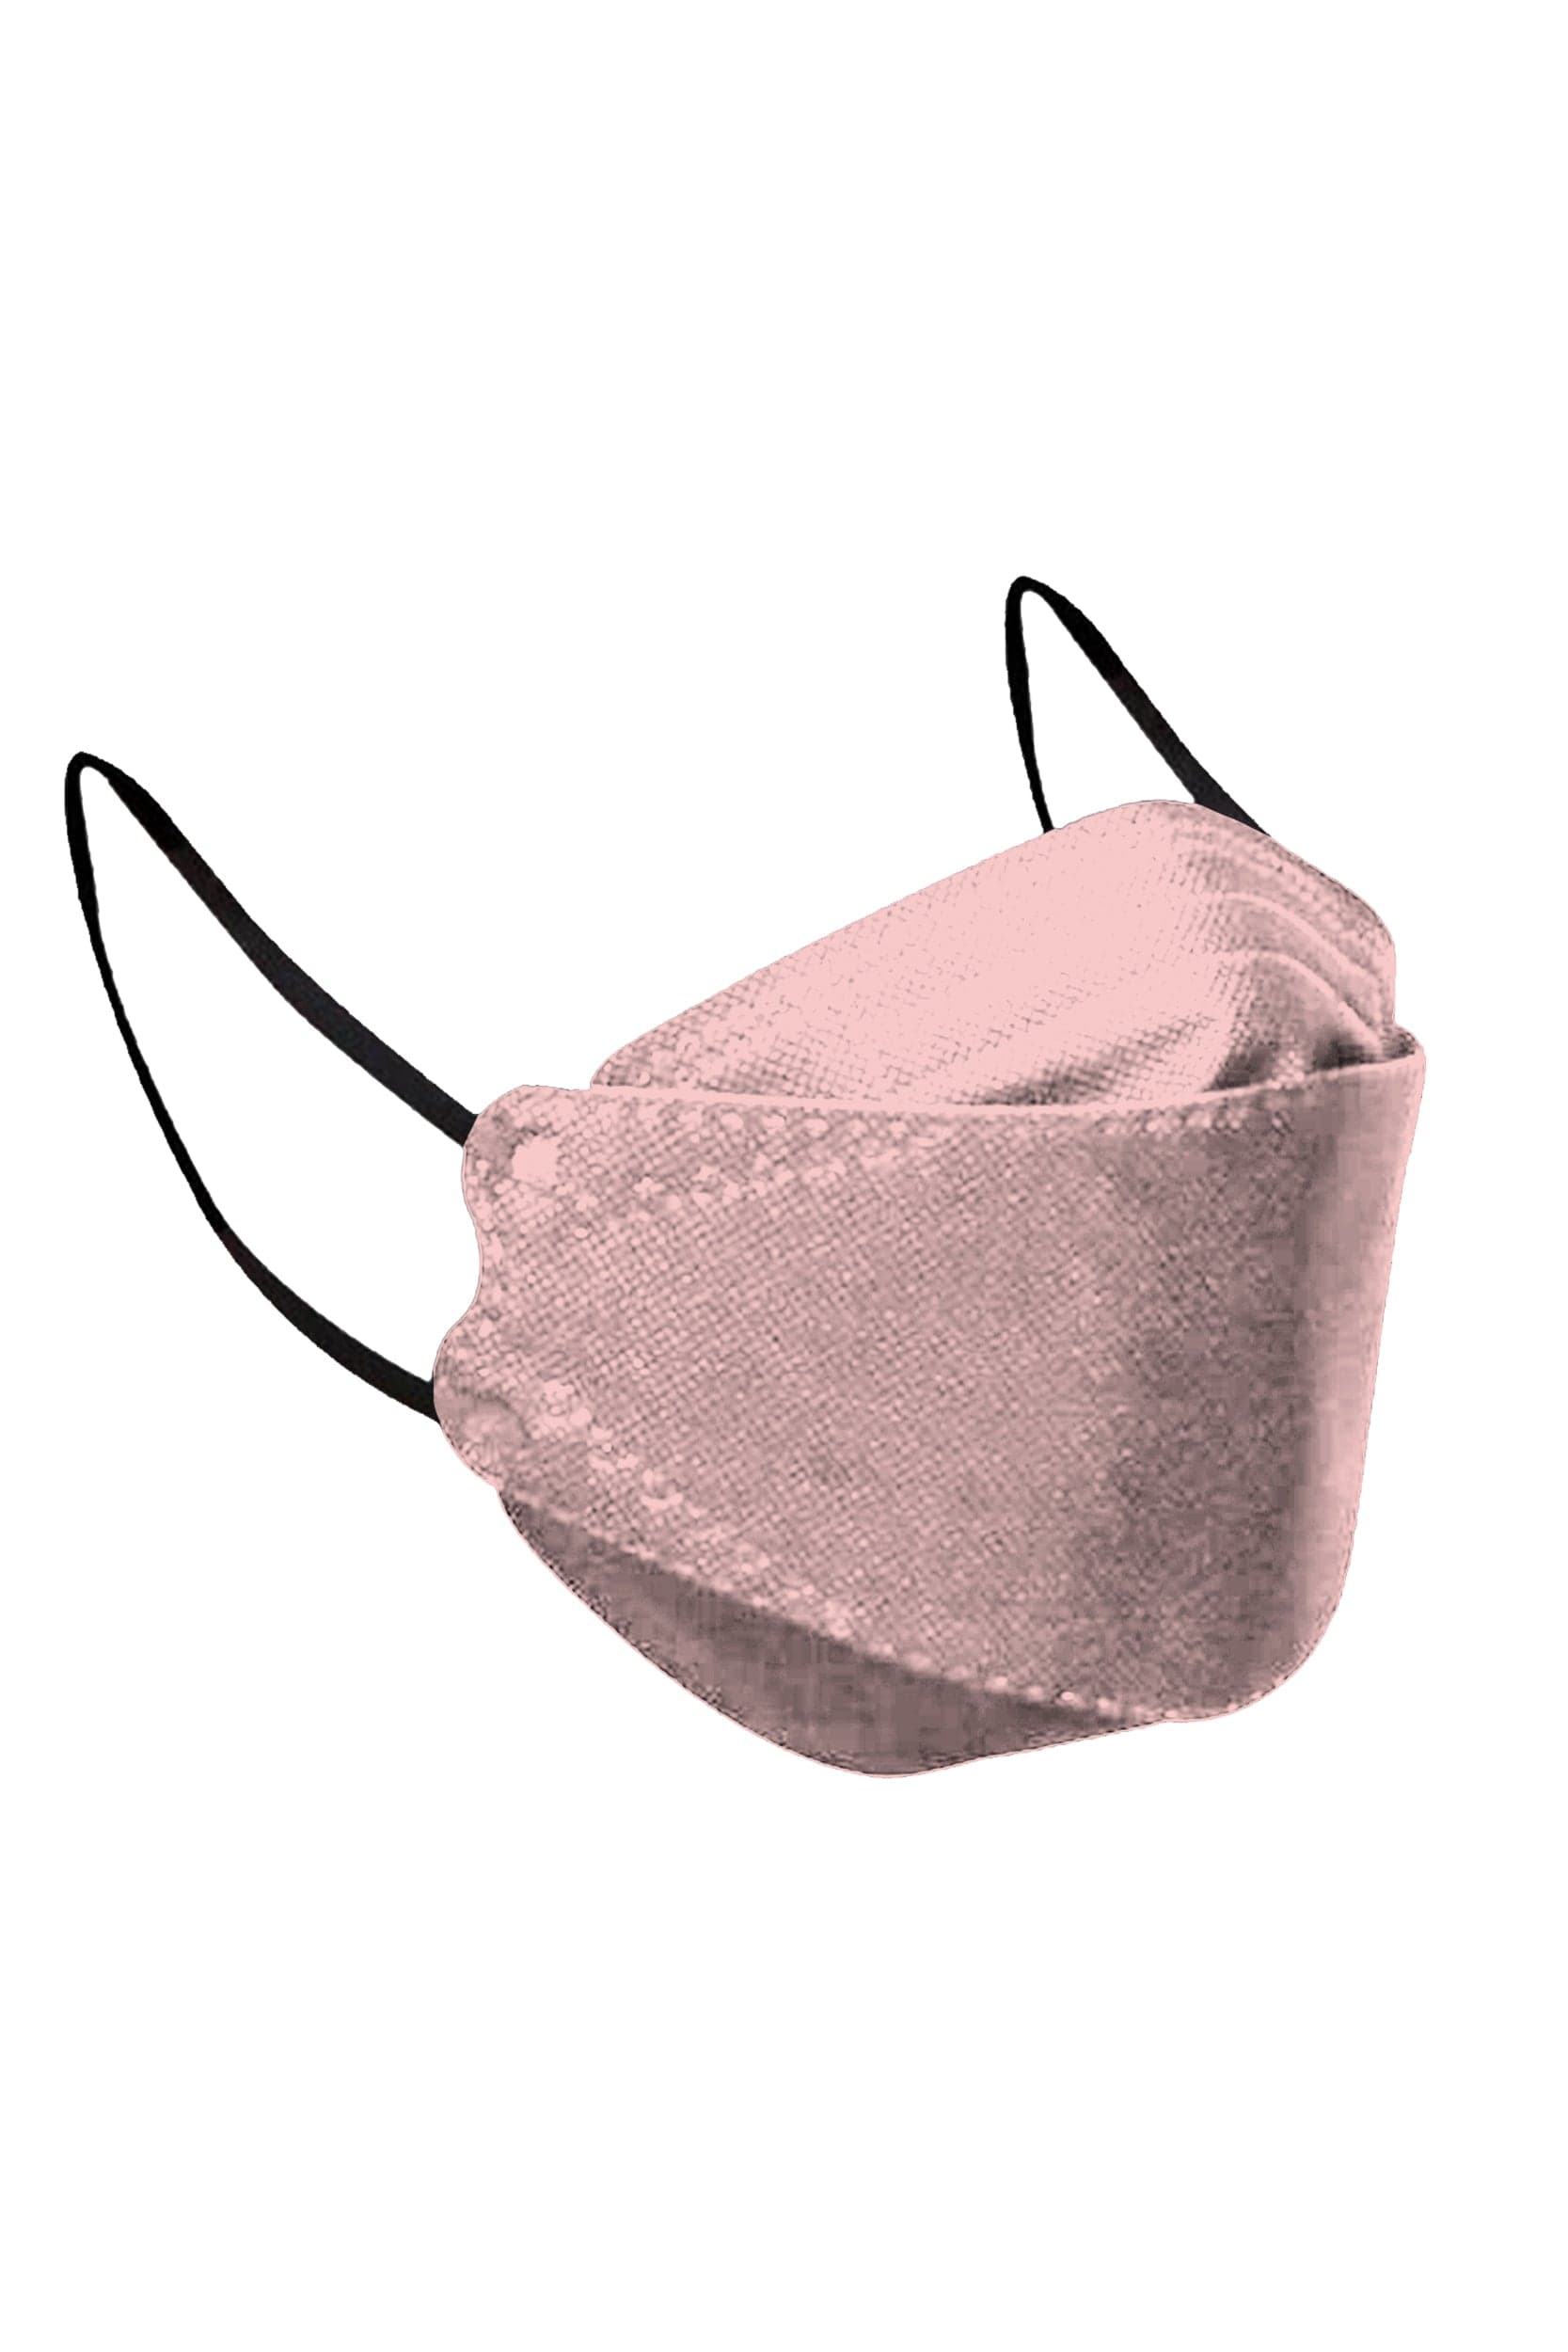 Stylish light pink KF94 face mask, with soft black ear loops and high quality fabric. 